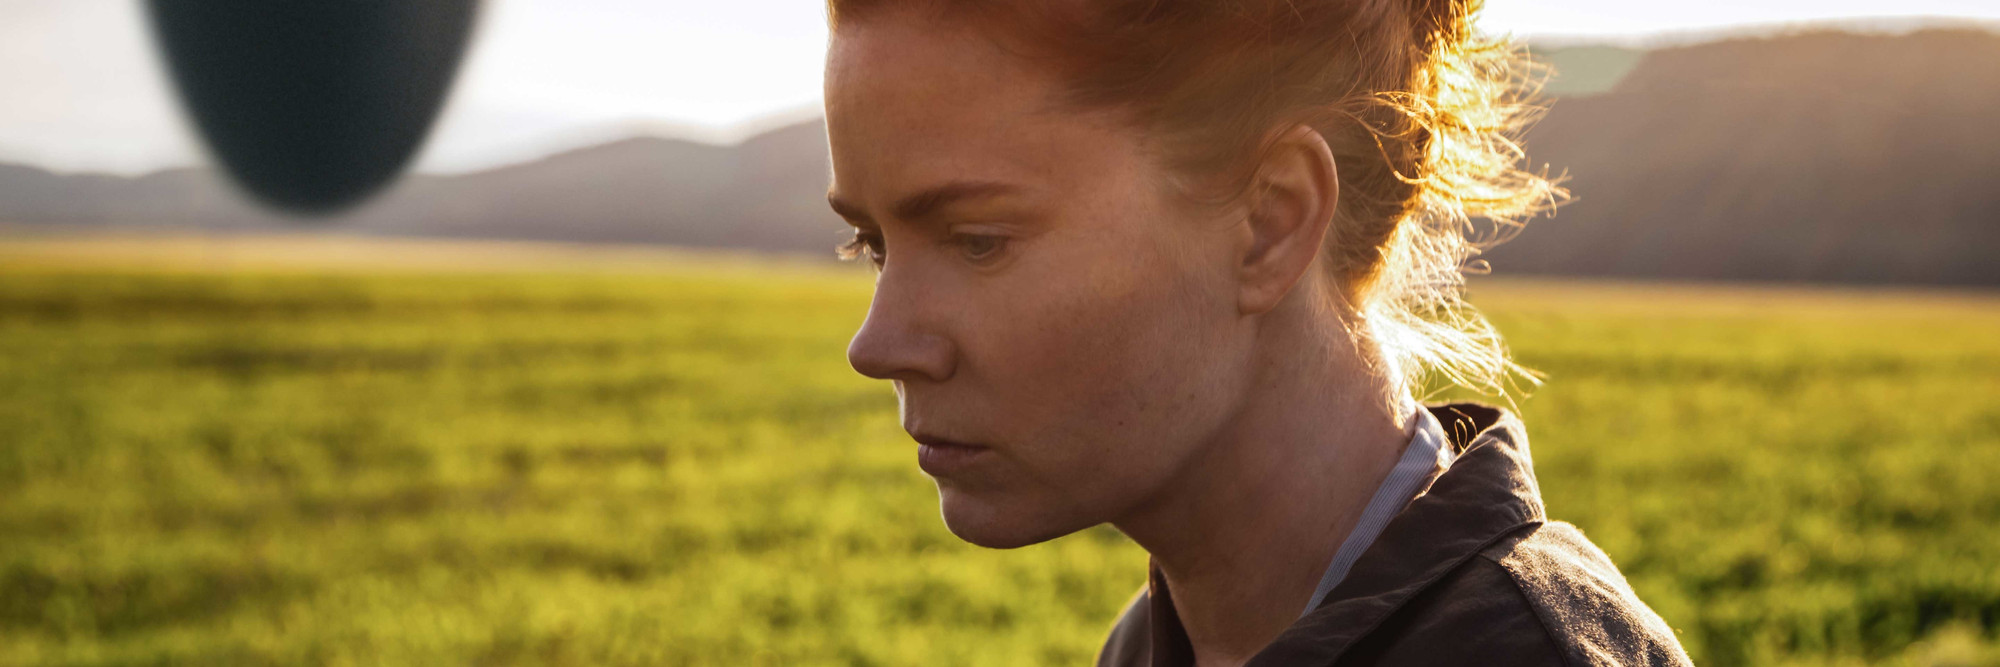 Arrival. 2015. USA. Directed by Denis Villeneuve. Courtesy of Paramount Pictures